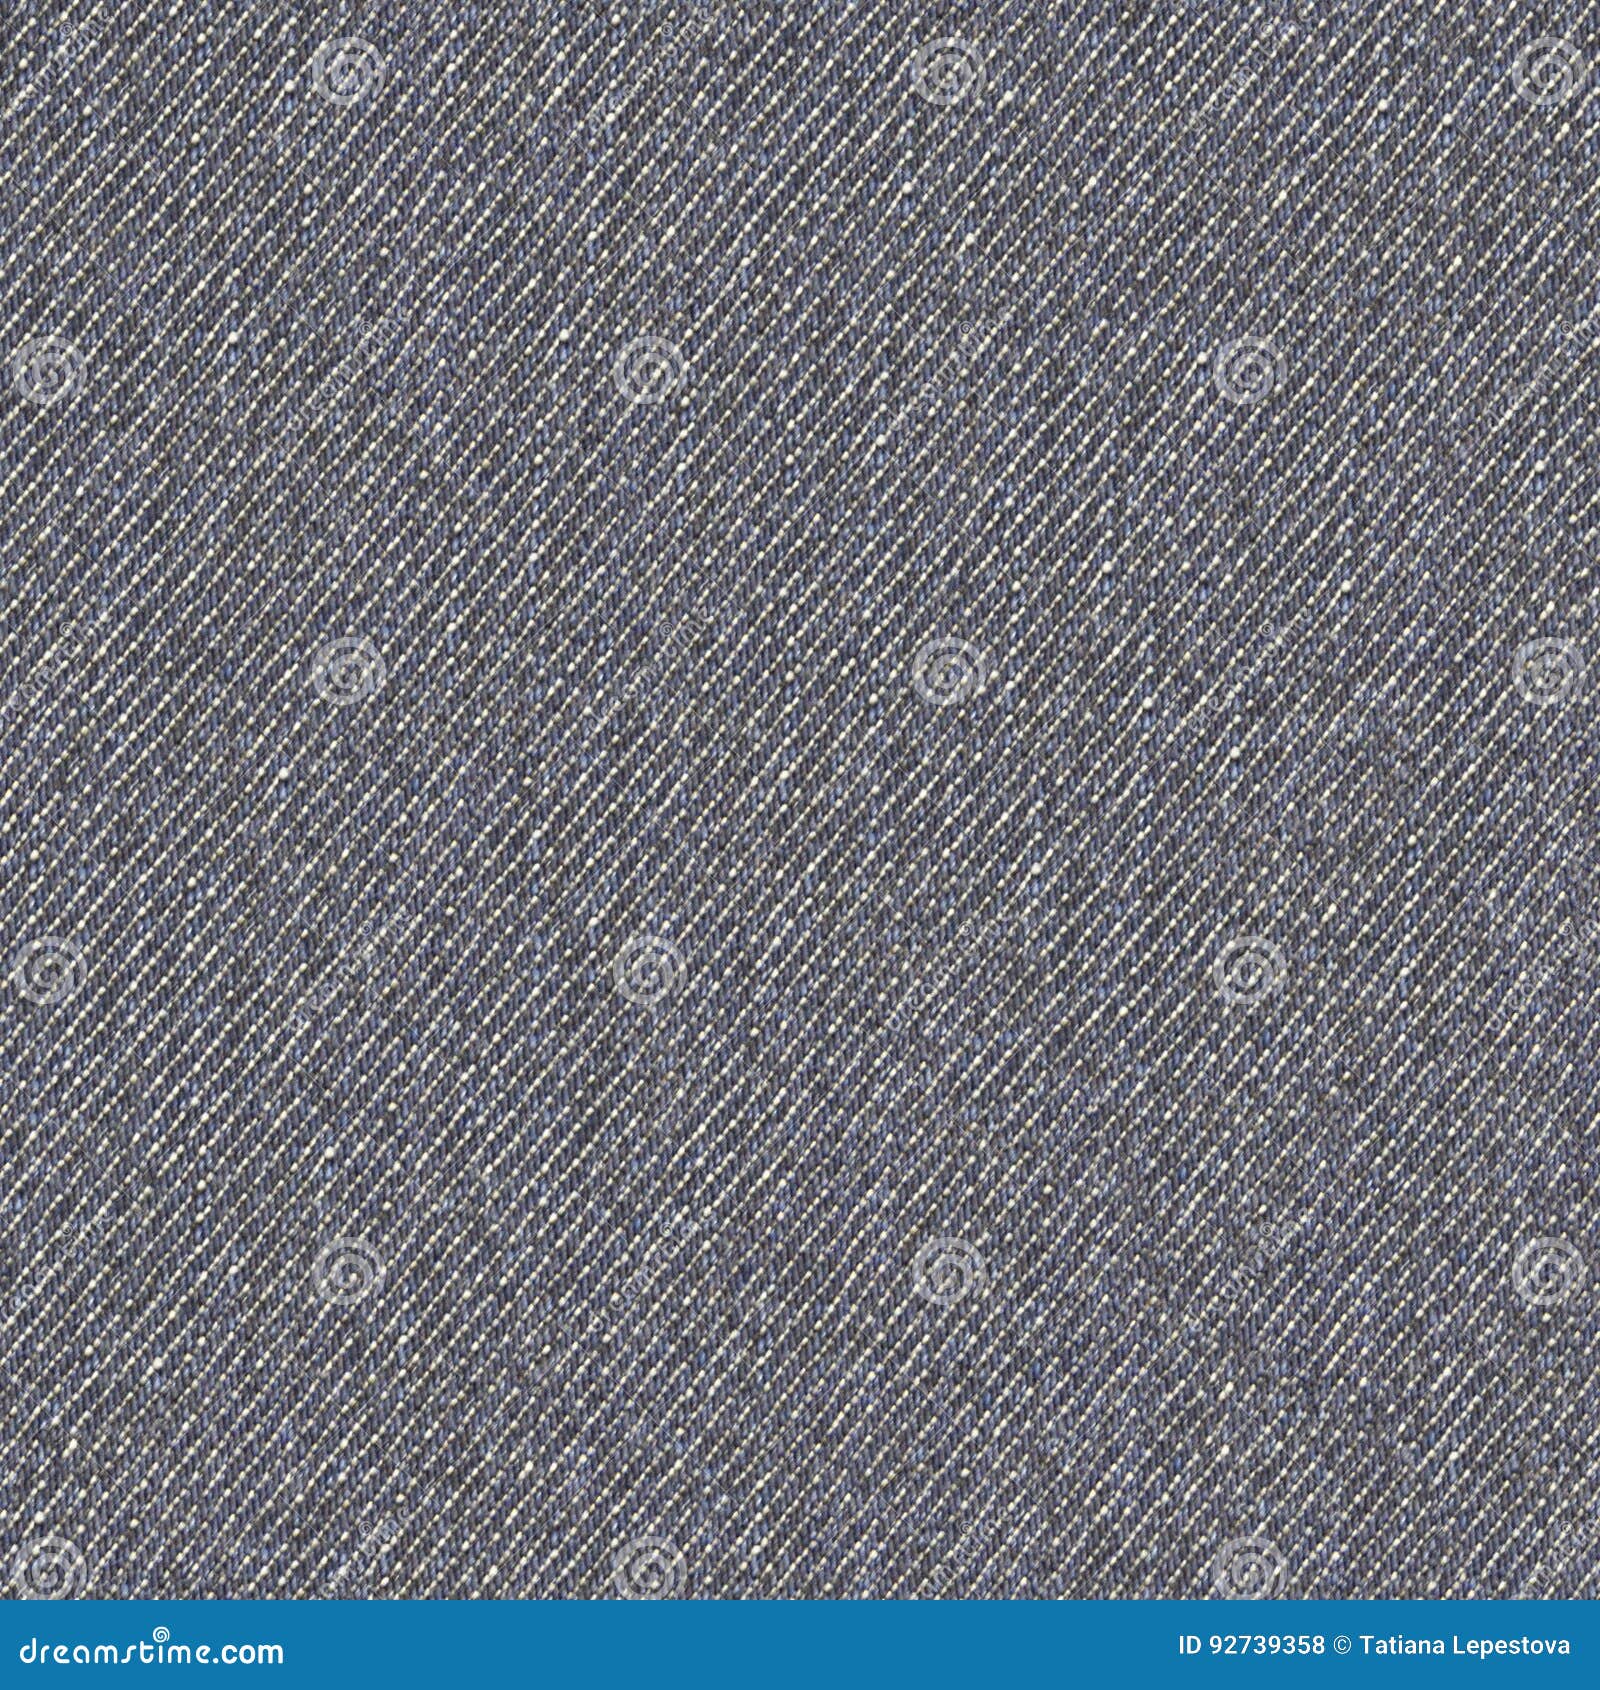 fabric texture 5 diffuse seamless map. jeans material.